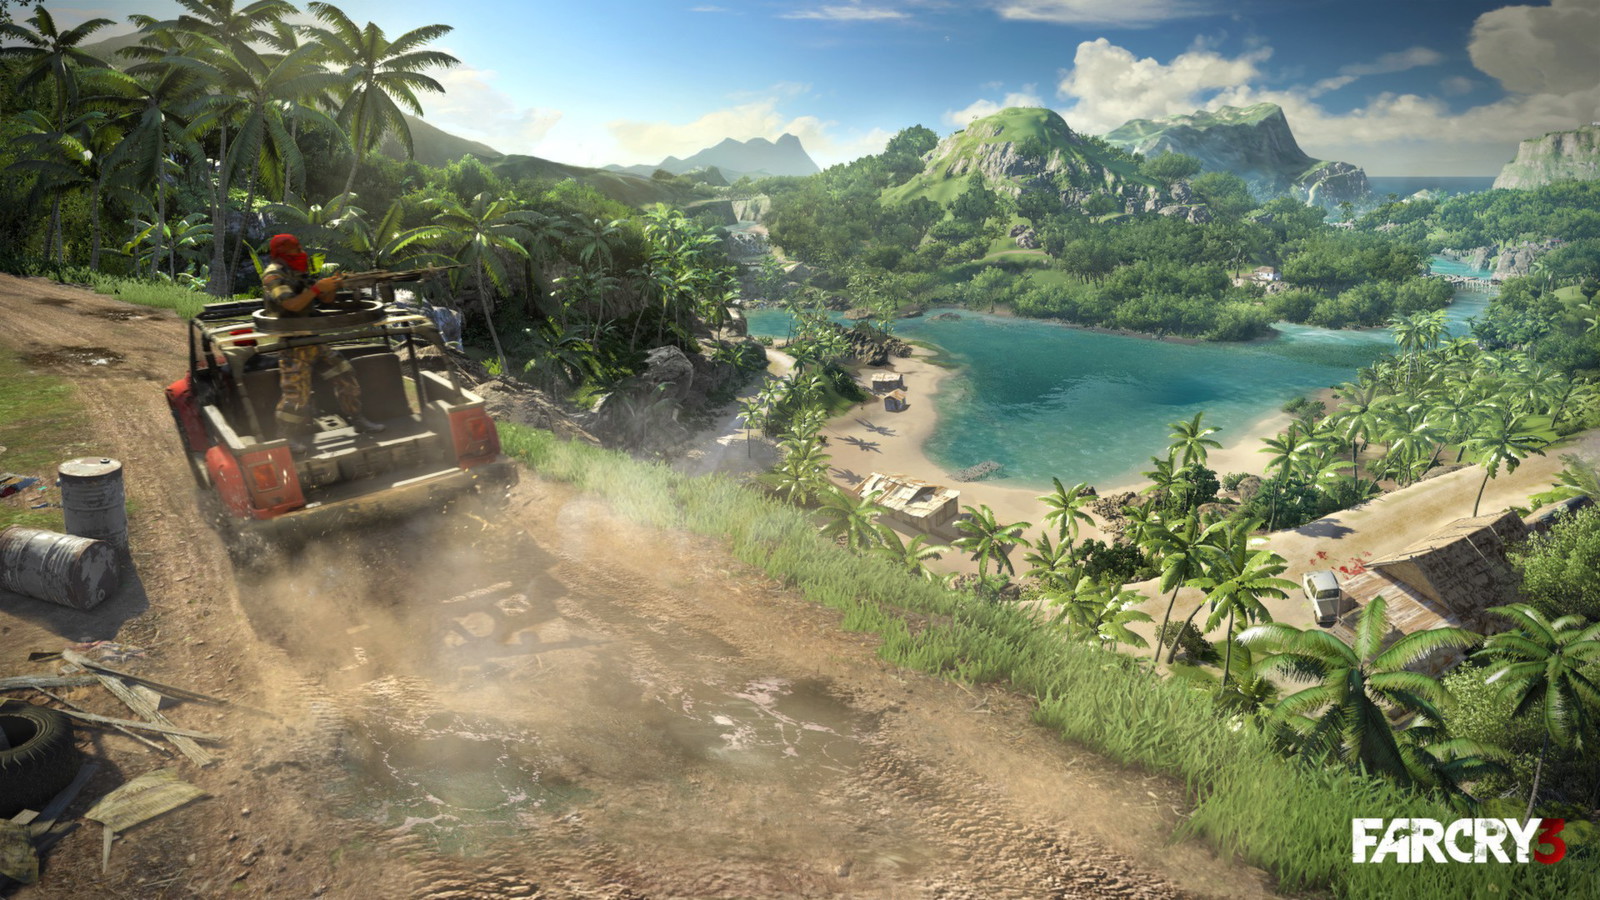 Far Cry 3 was a massive success for Ubisoft 